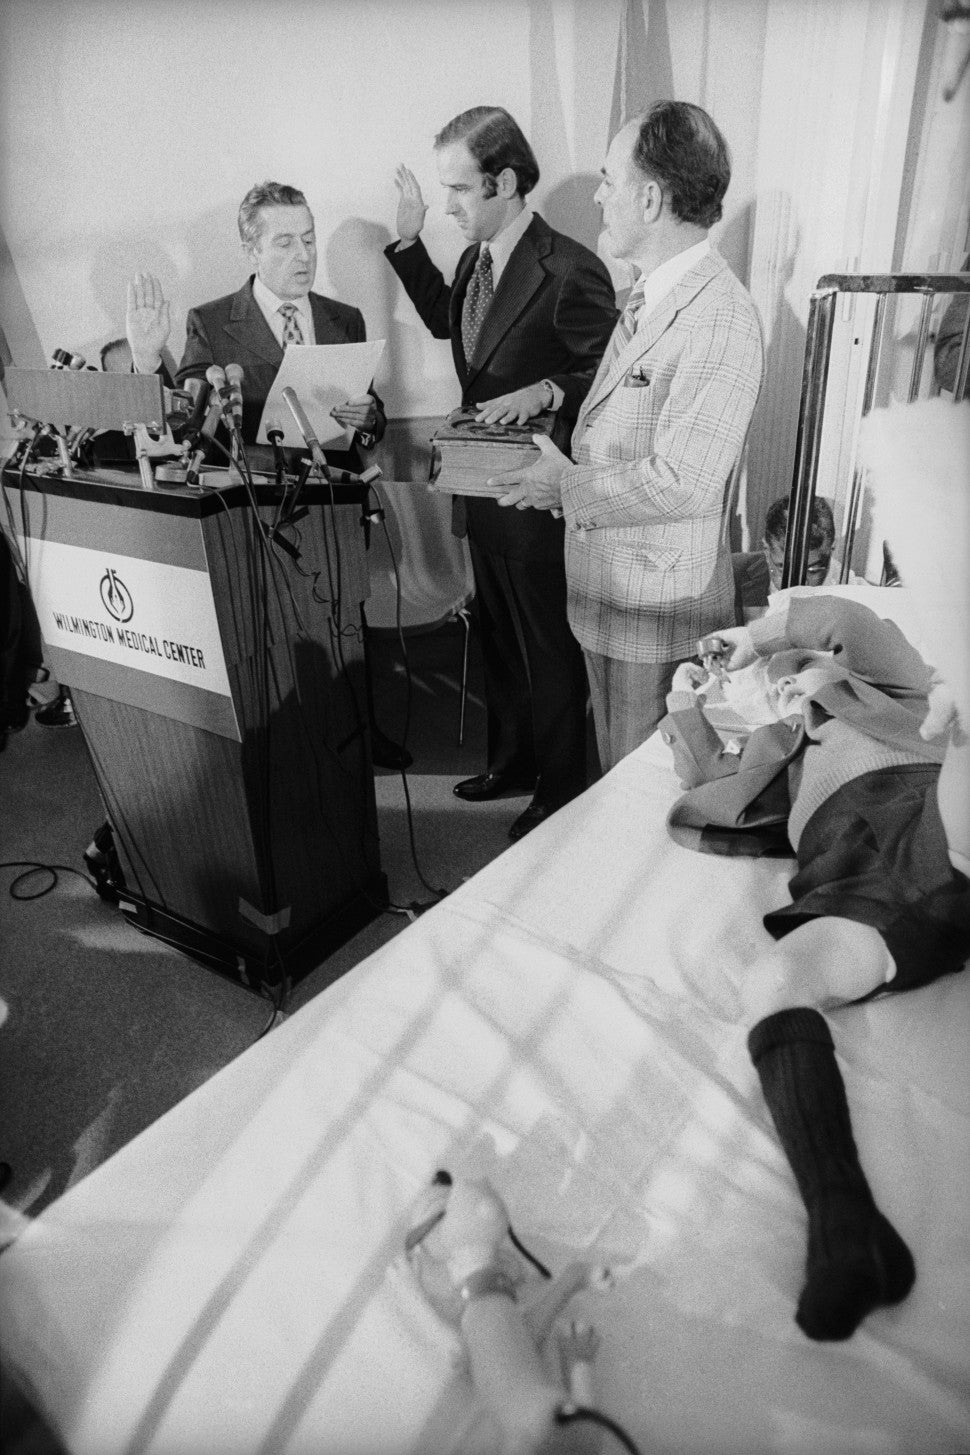 Joseph Biden takes the oath of office from the U.S. Senate's secretary, Frank Valeo with his father-in-law Robert Hunter and son Joseph Beau Biden at his side, in Beau's hospital room. 